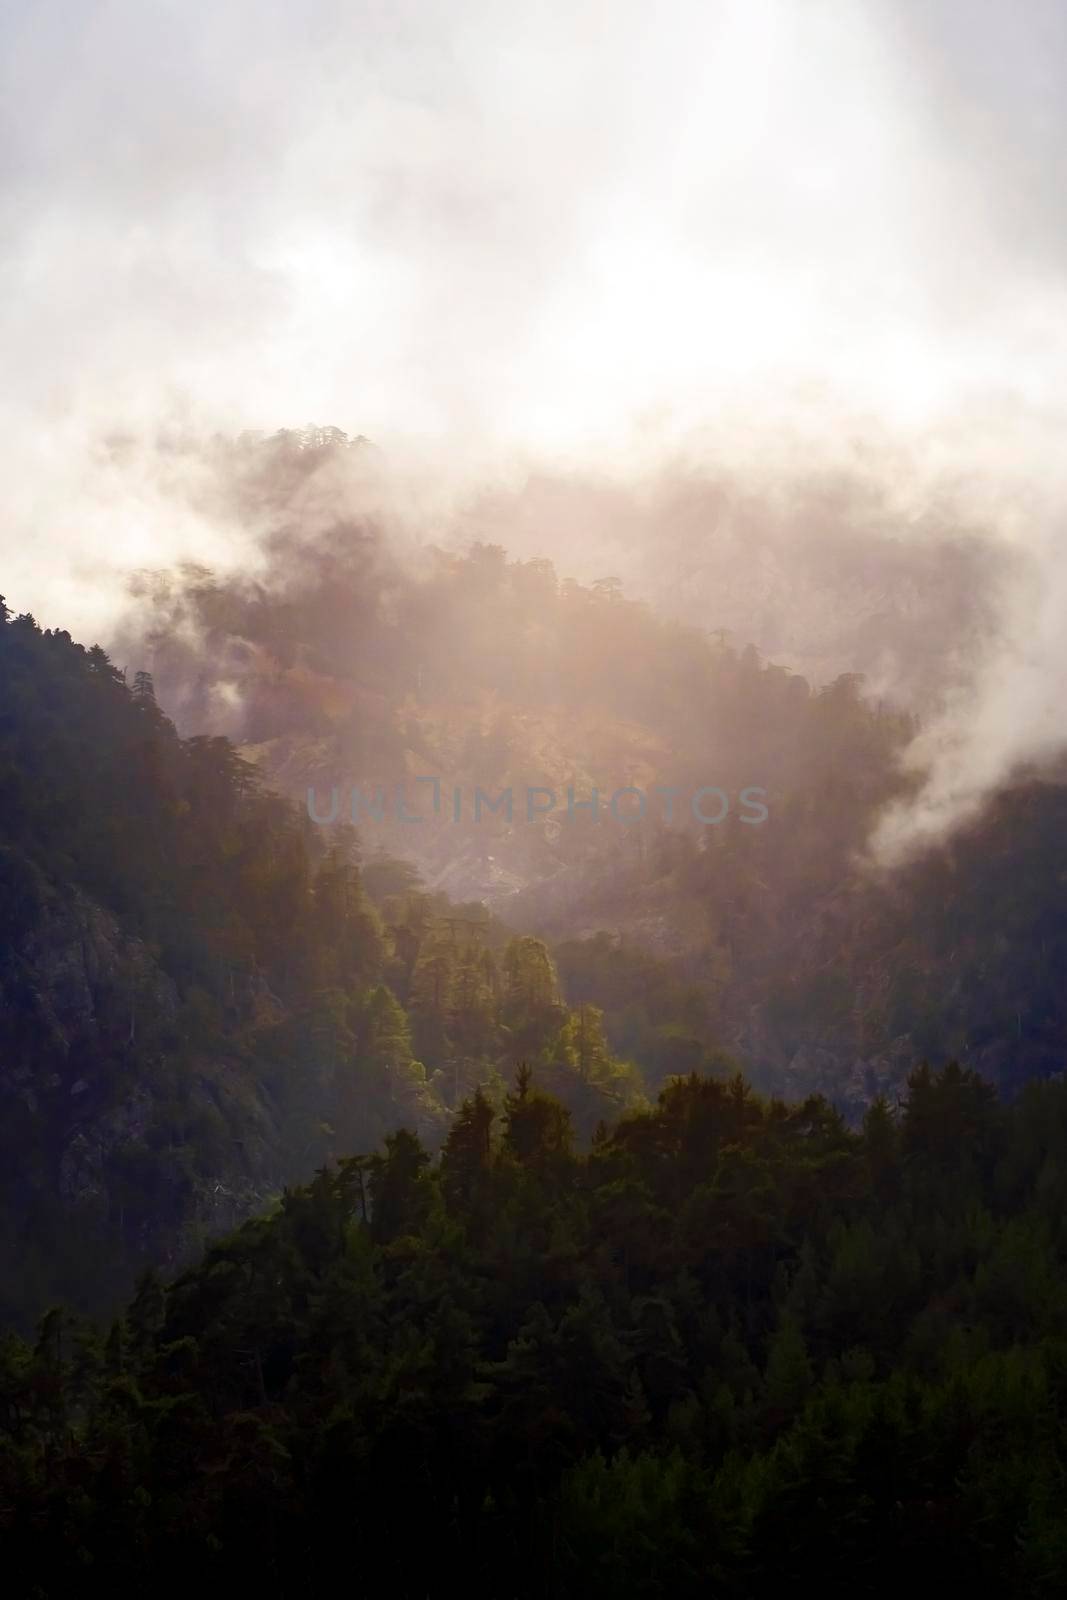 Mountain slopes with dense forest and fog, clouds through which the first rays of the sun pass. Seasonal weather in the spring mountains, the view from the top down.